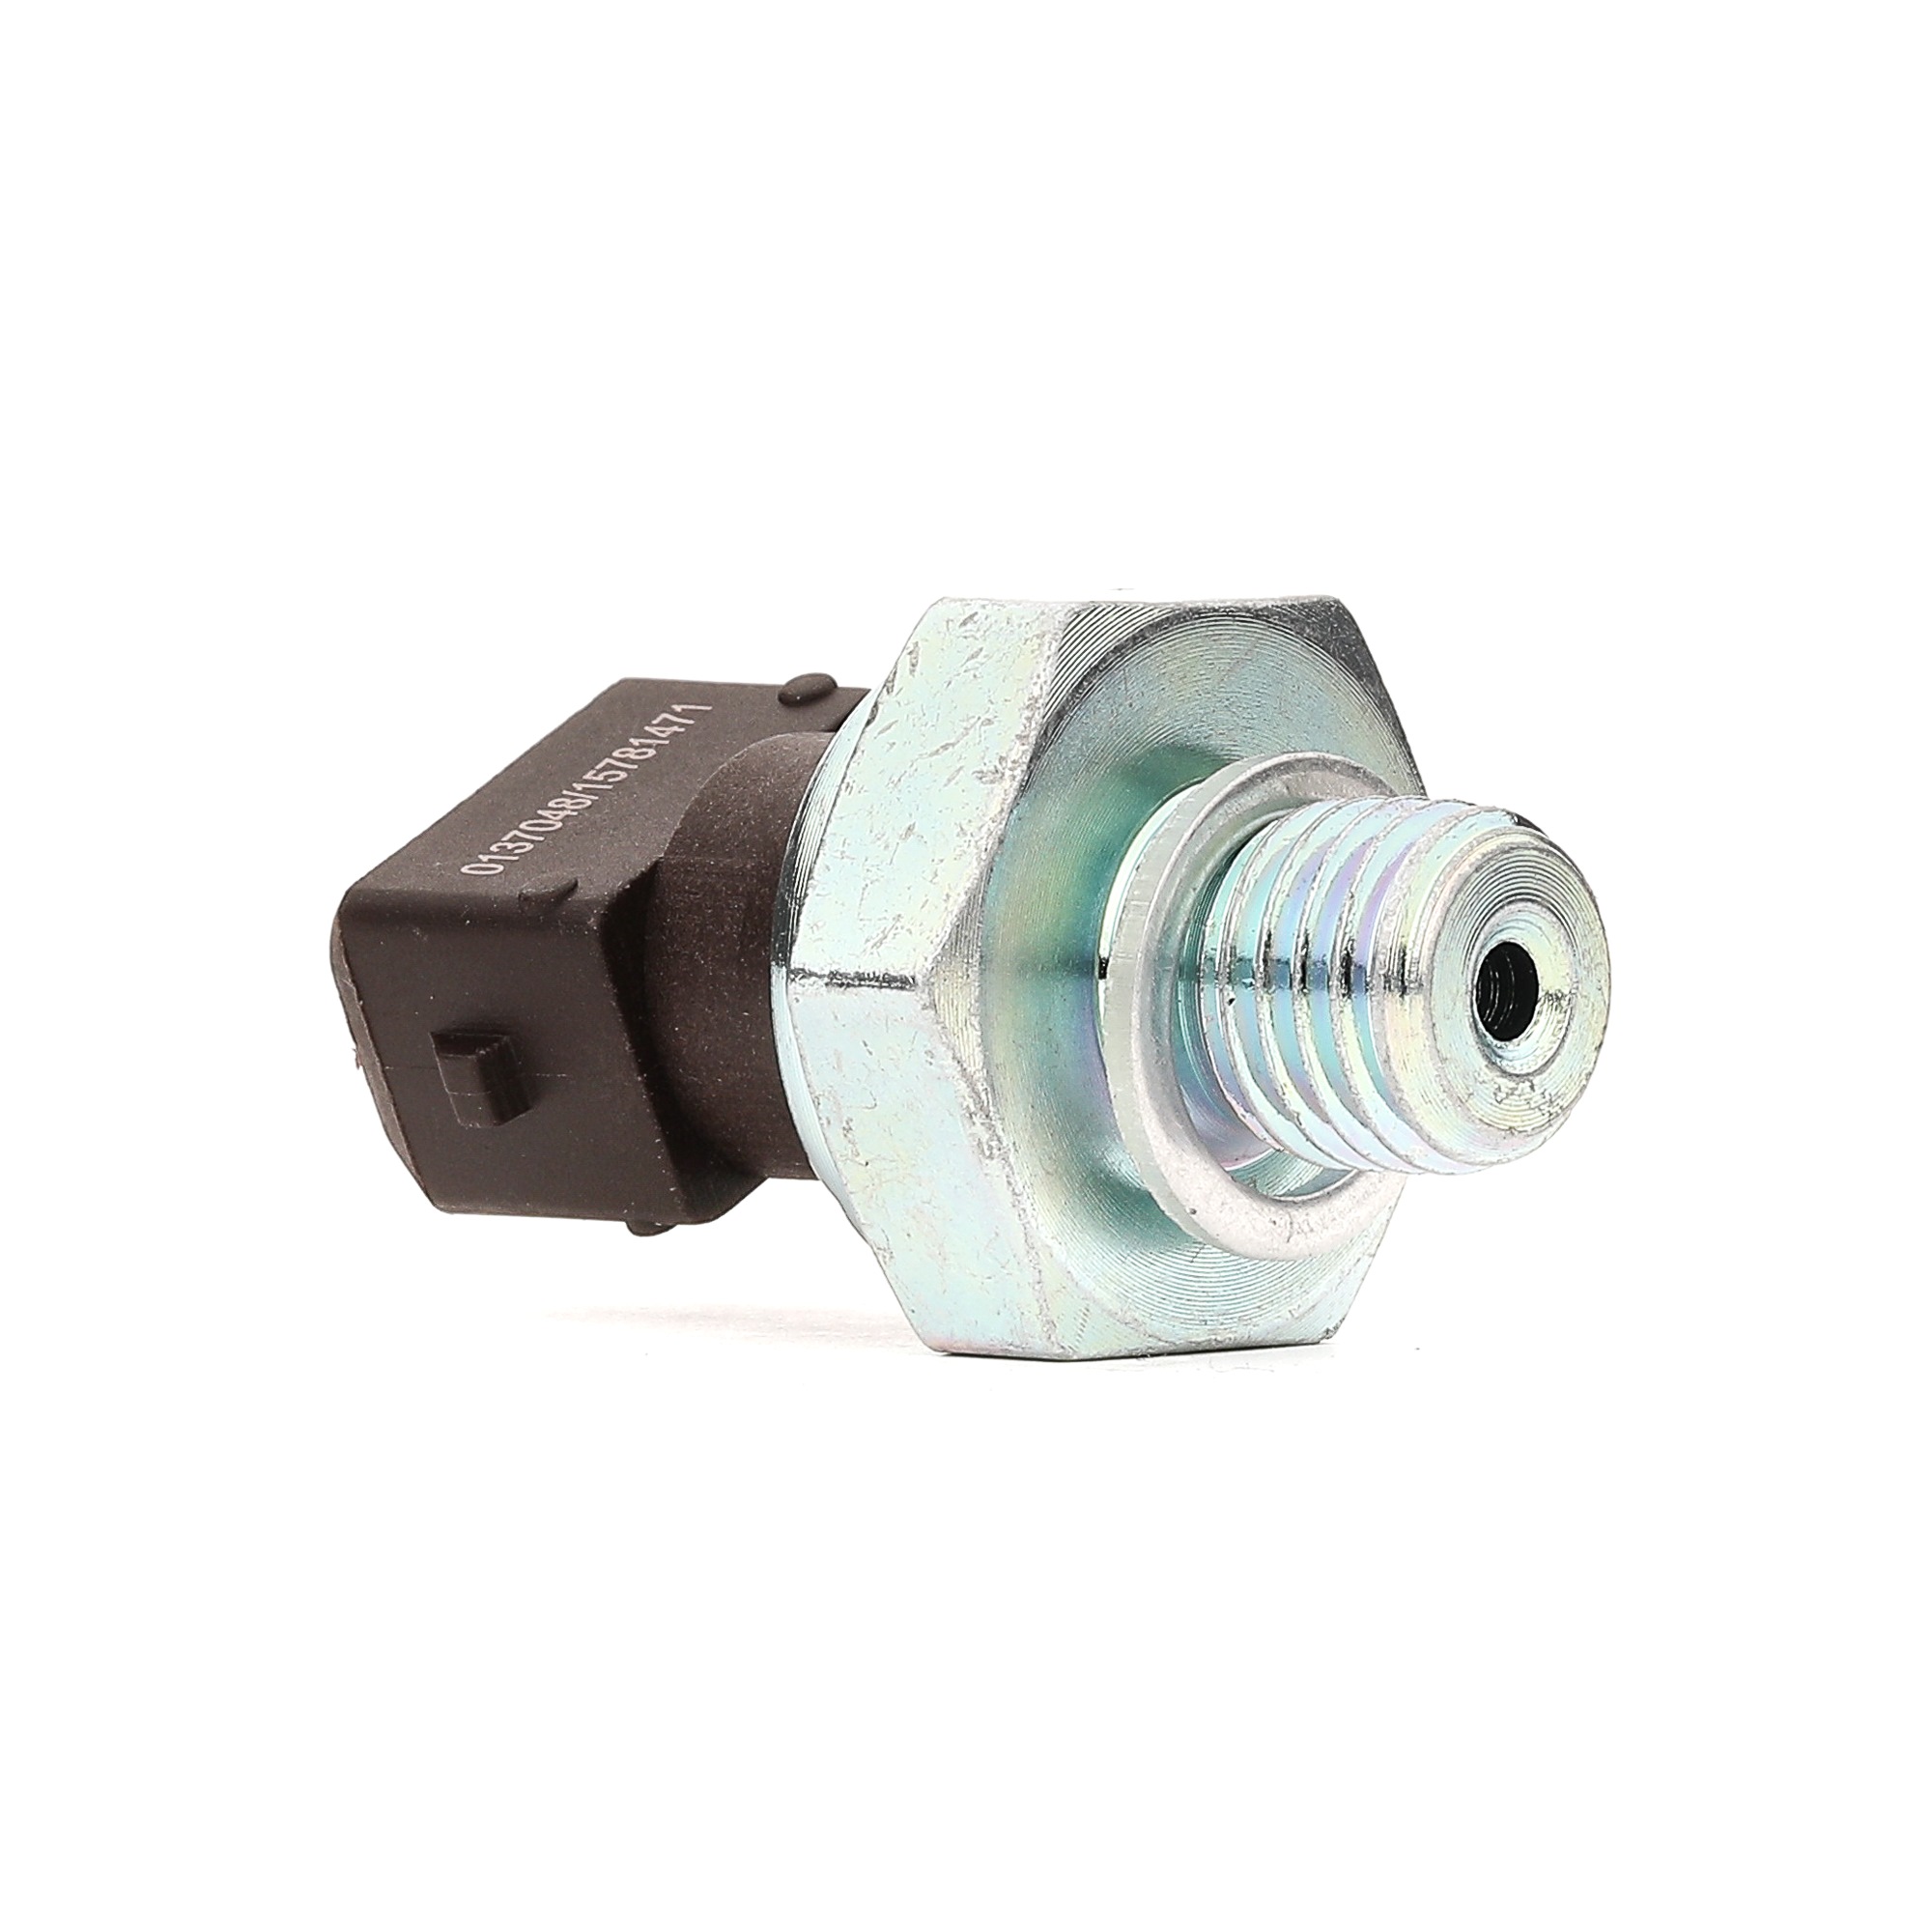 STARK M12 x 1,5, 0,2 - 0,5 bar, Normally Closed Contact Number of pins: 1-pin connector Oil Pressure Switch SKOPS-2130017 buy